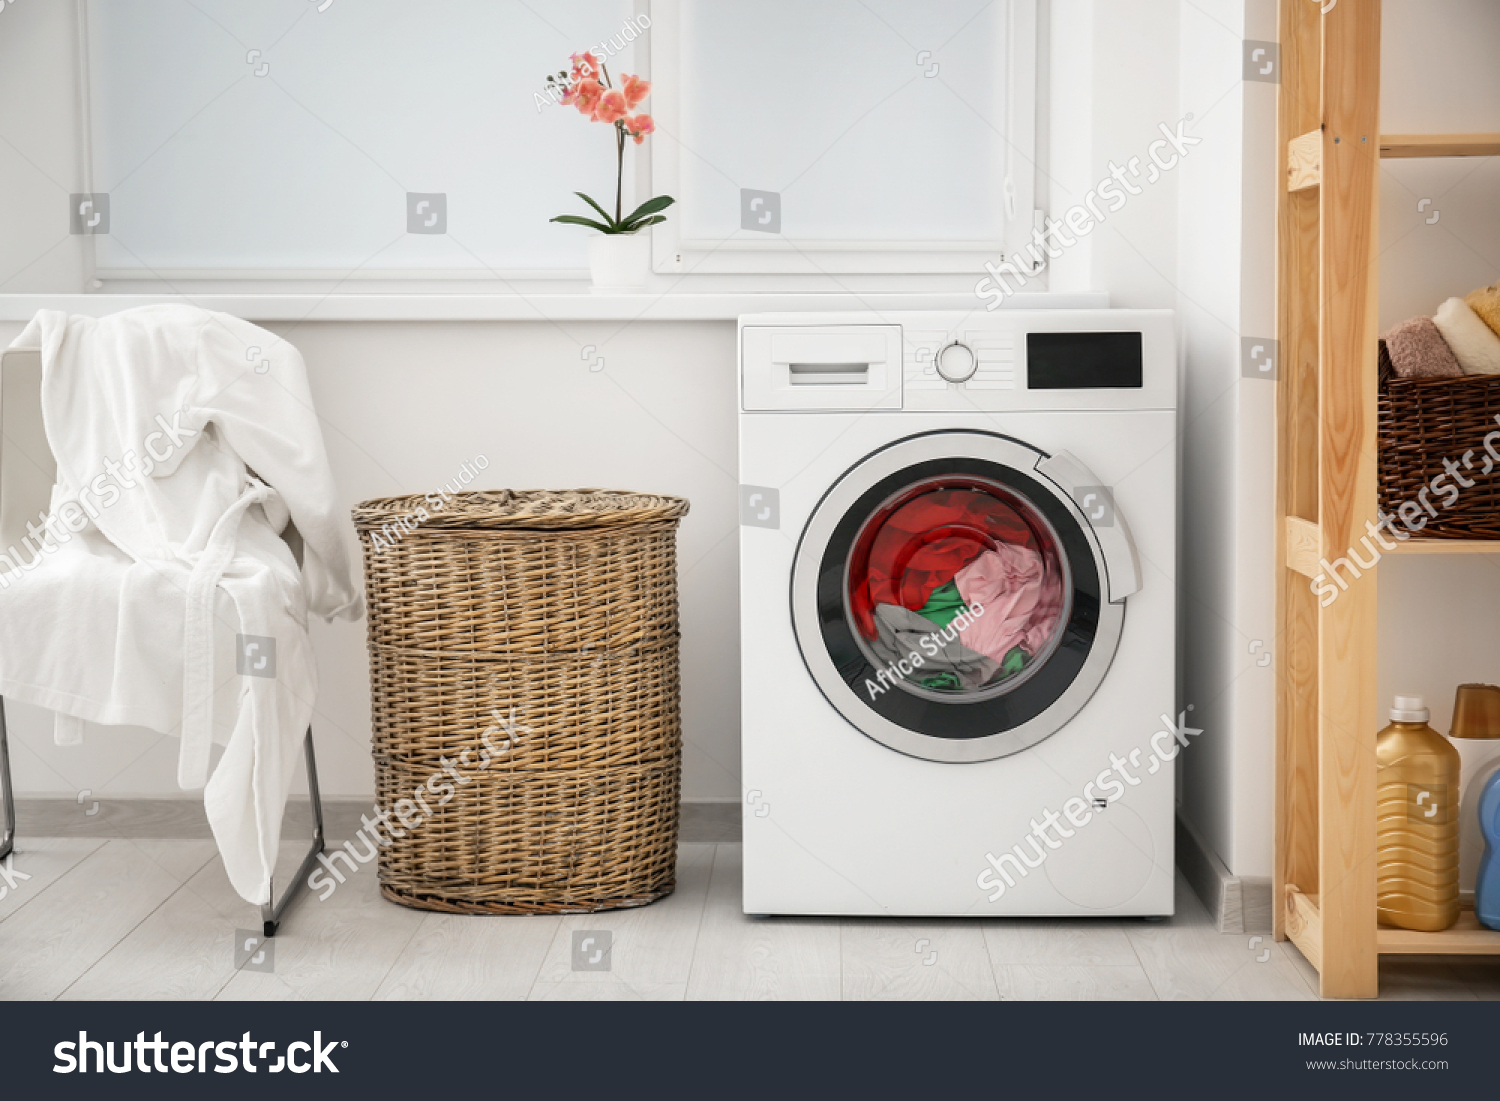 Laundry in washing machine and basket indoors #778355596